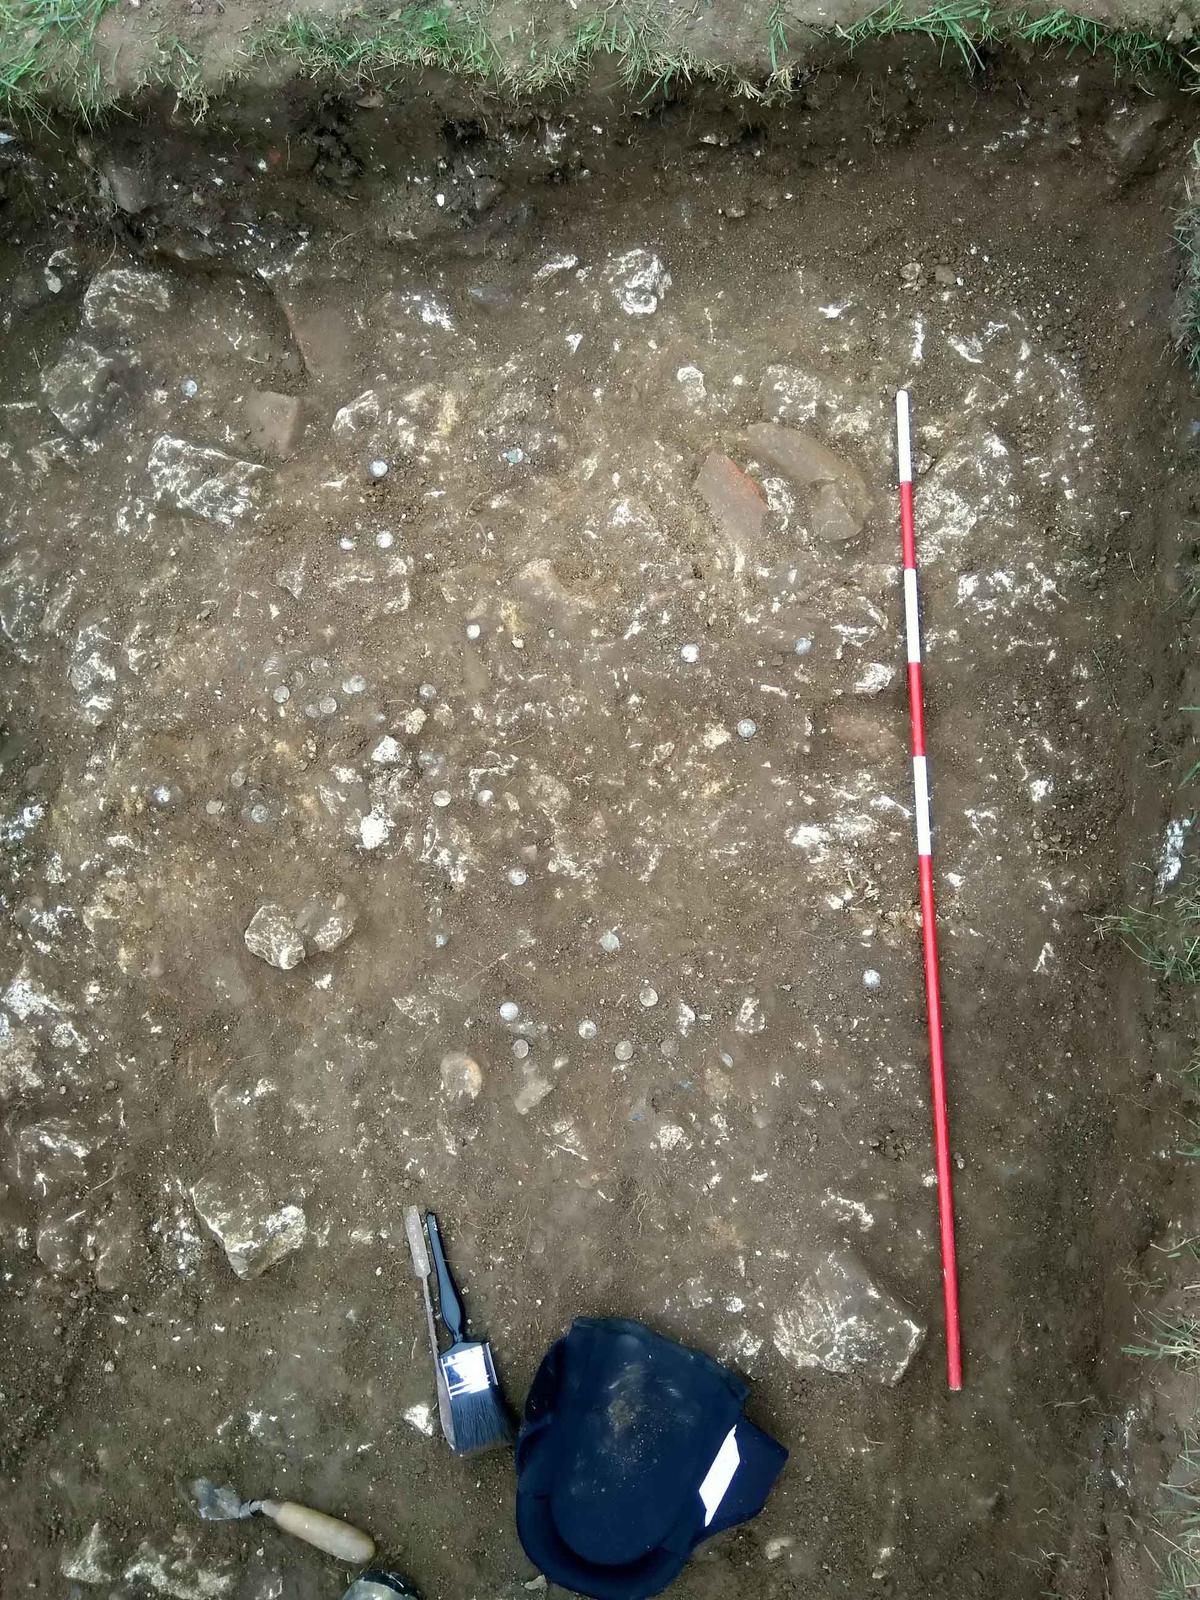 The excavated dig site near Hambleden, Buckinghamshire, where the coins were unearthed. (SWNS)